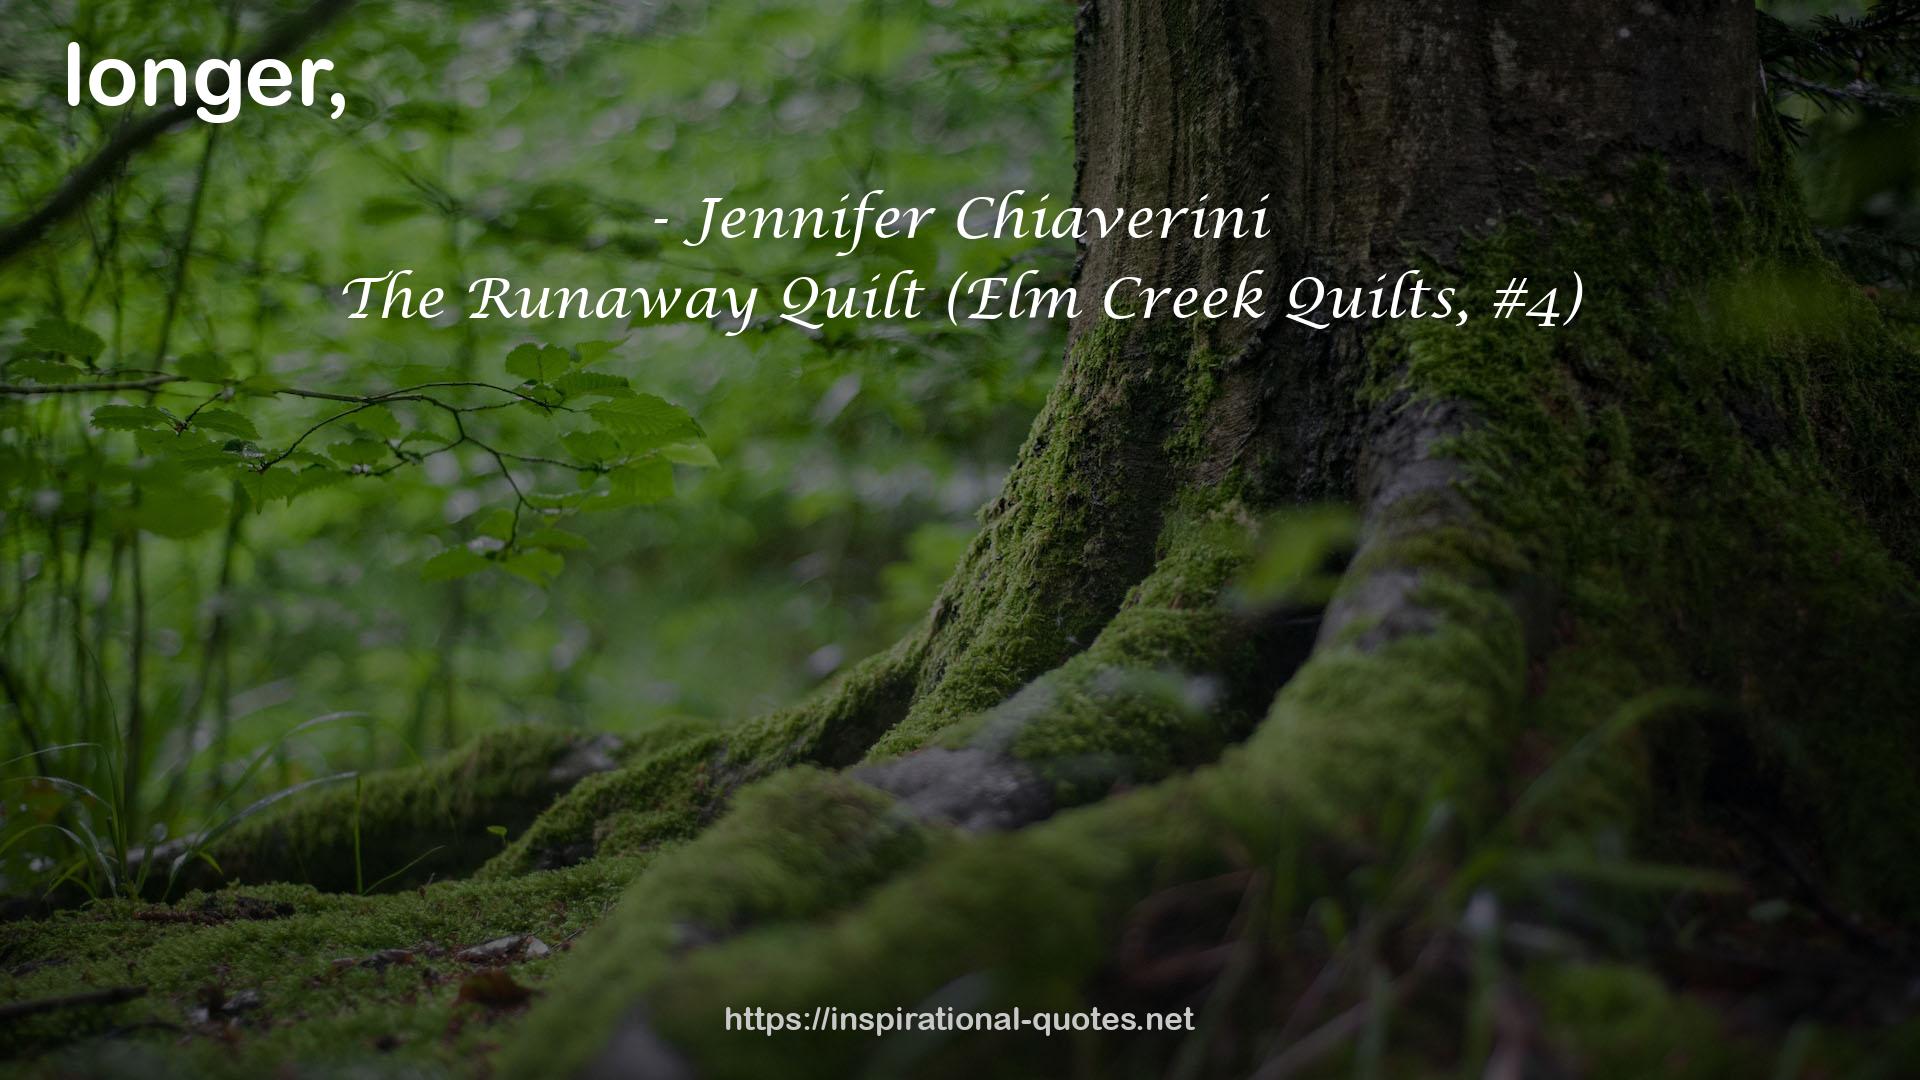 The Runaway Quilt (Elm Creek Quilts, #4) QUOTES